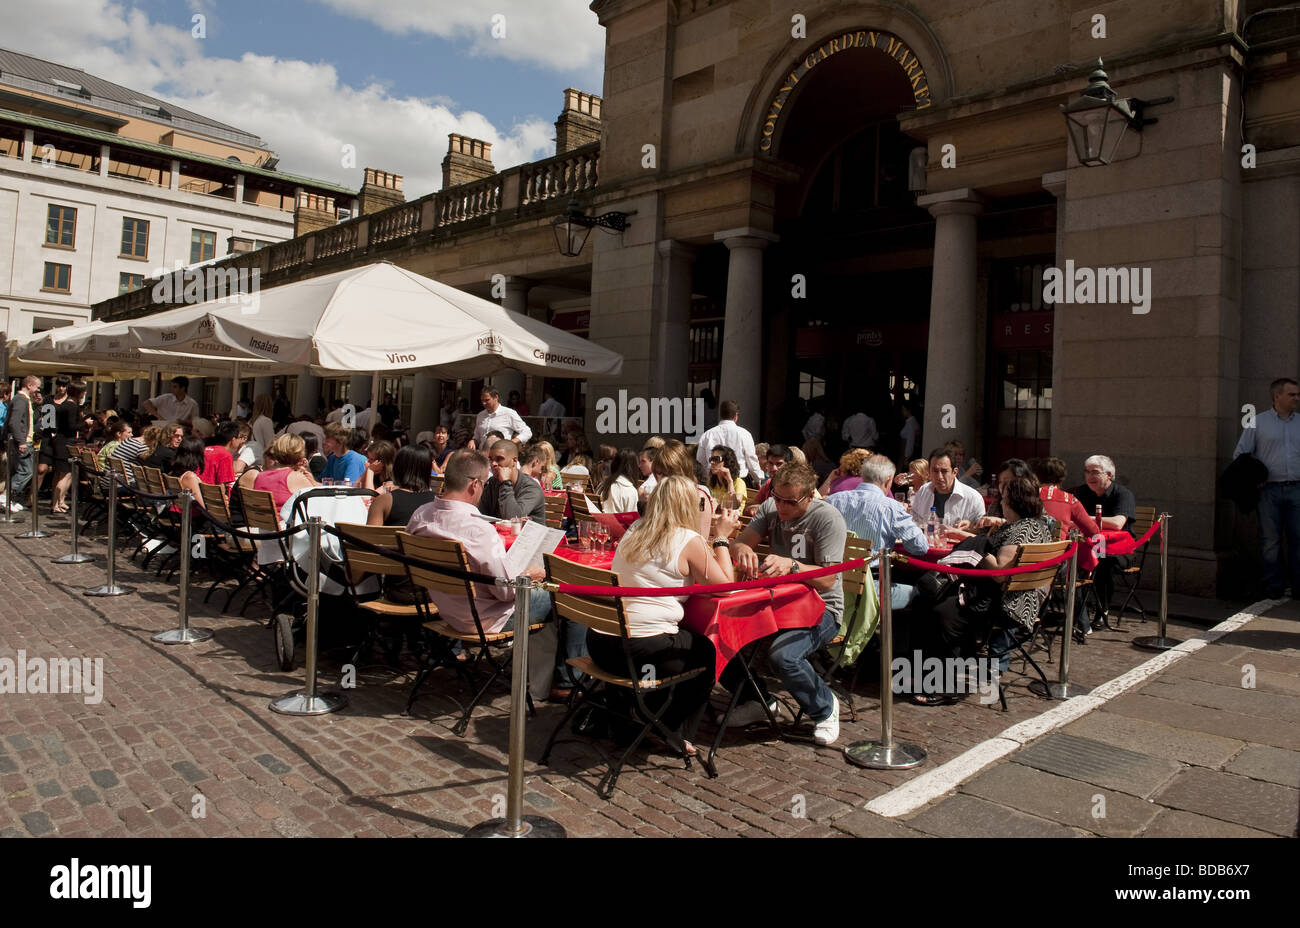 Large group of diners eating al fresco style in restaurant outside Covent Garden Market in West End of London Stock Photo